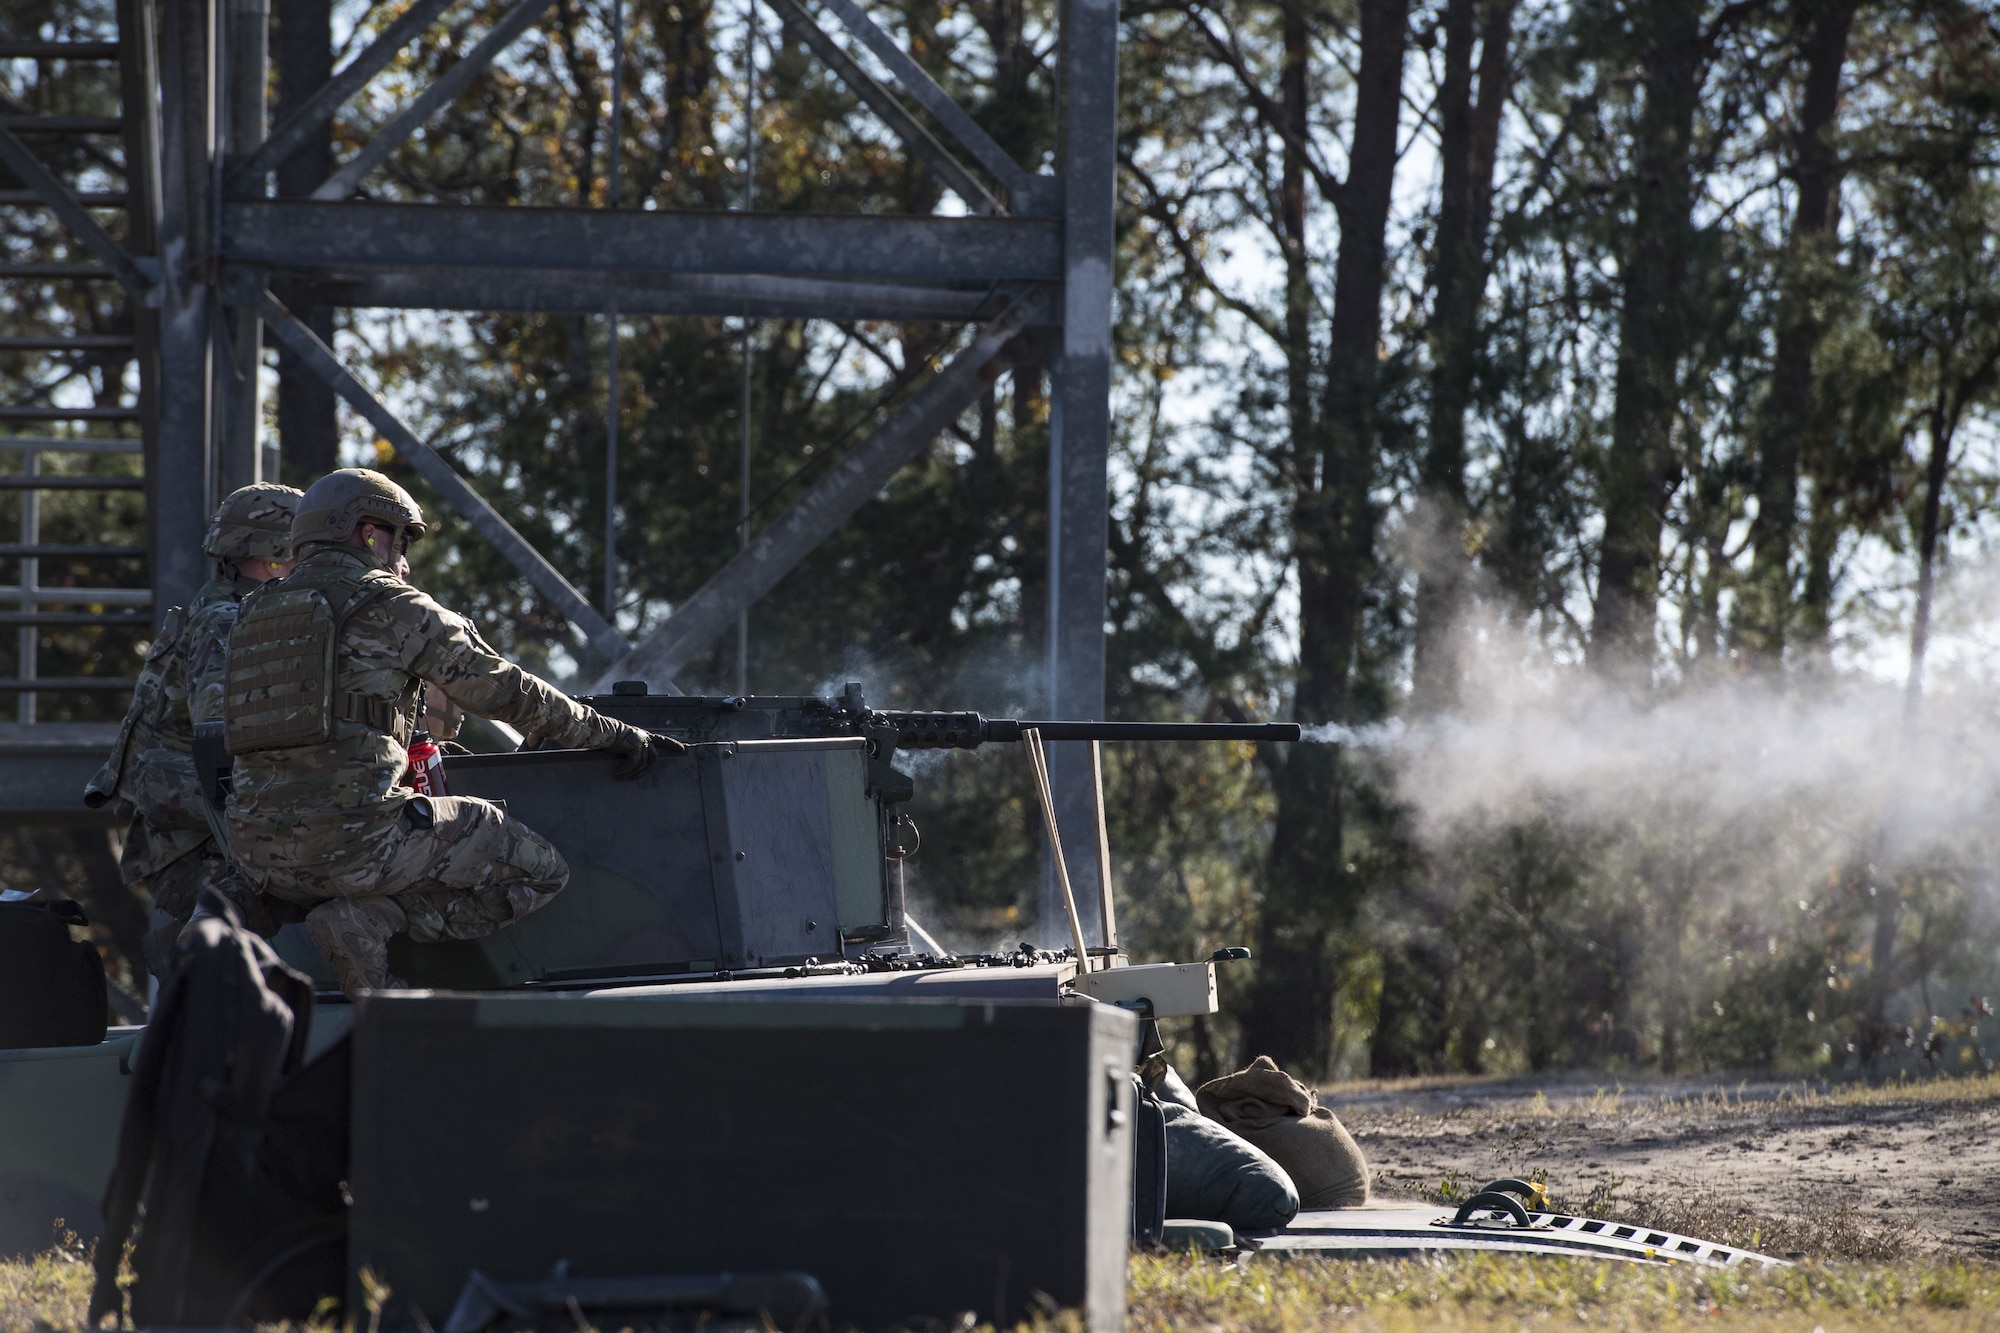 An Airman from the 823d Base Defense Squadron, fires a .50 Caliber M2 machine gun during a heavy weapons qualification, Dec. 13, 2017, at Camp Blanding Joint Training Center, Fla. Airmen shot at targets with the M2 to maintain their proficiency and familiarize themselves with the weapon. (U.S. Air Force photo by Senior Airman Janiqua P. Robinson)